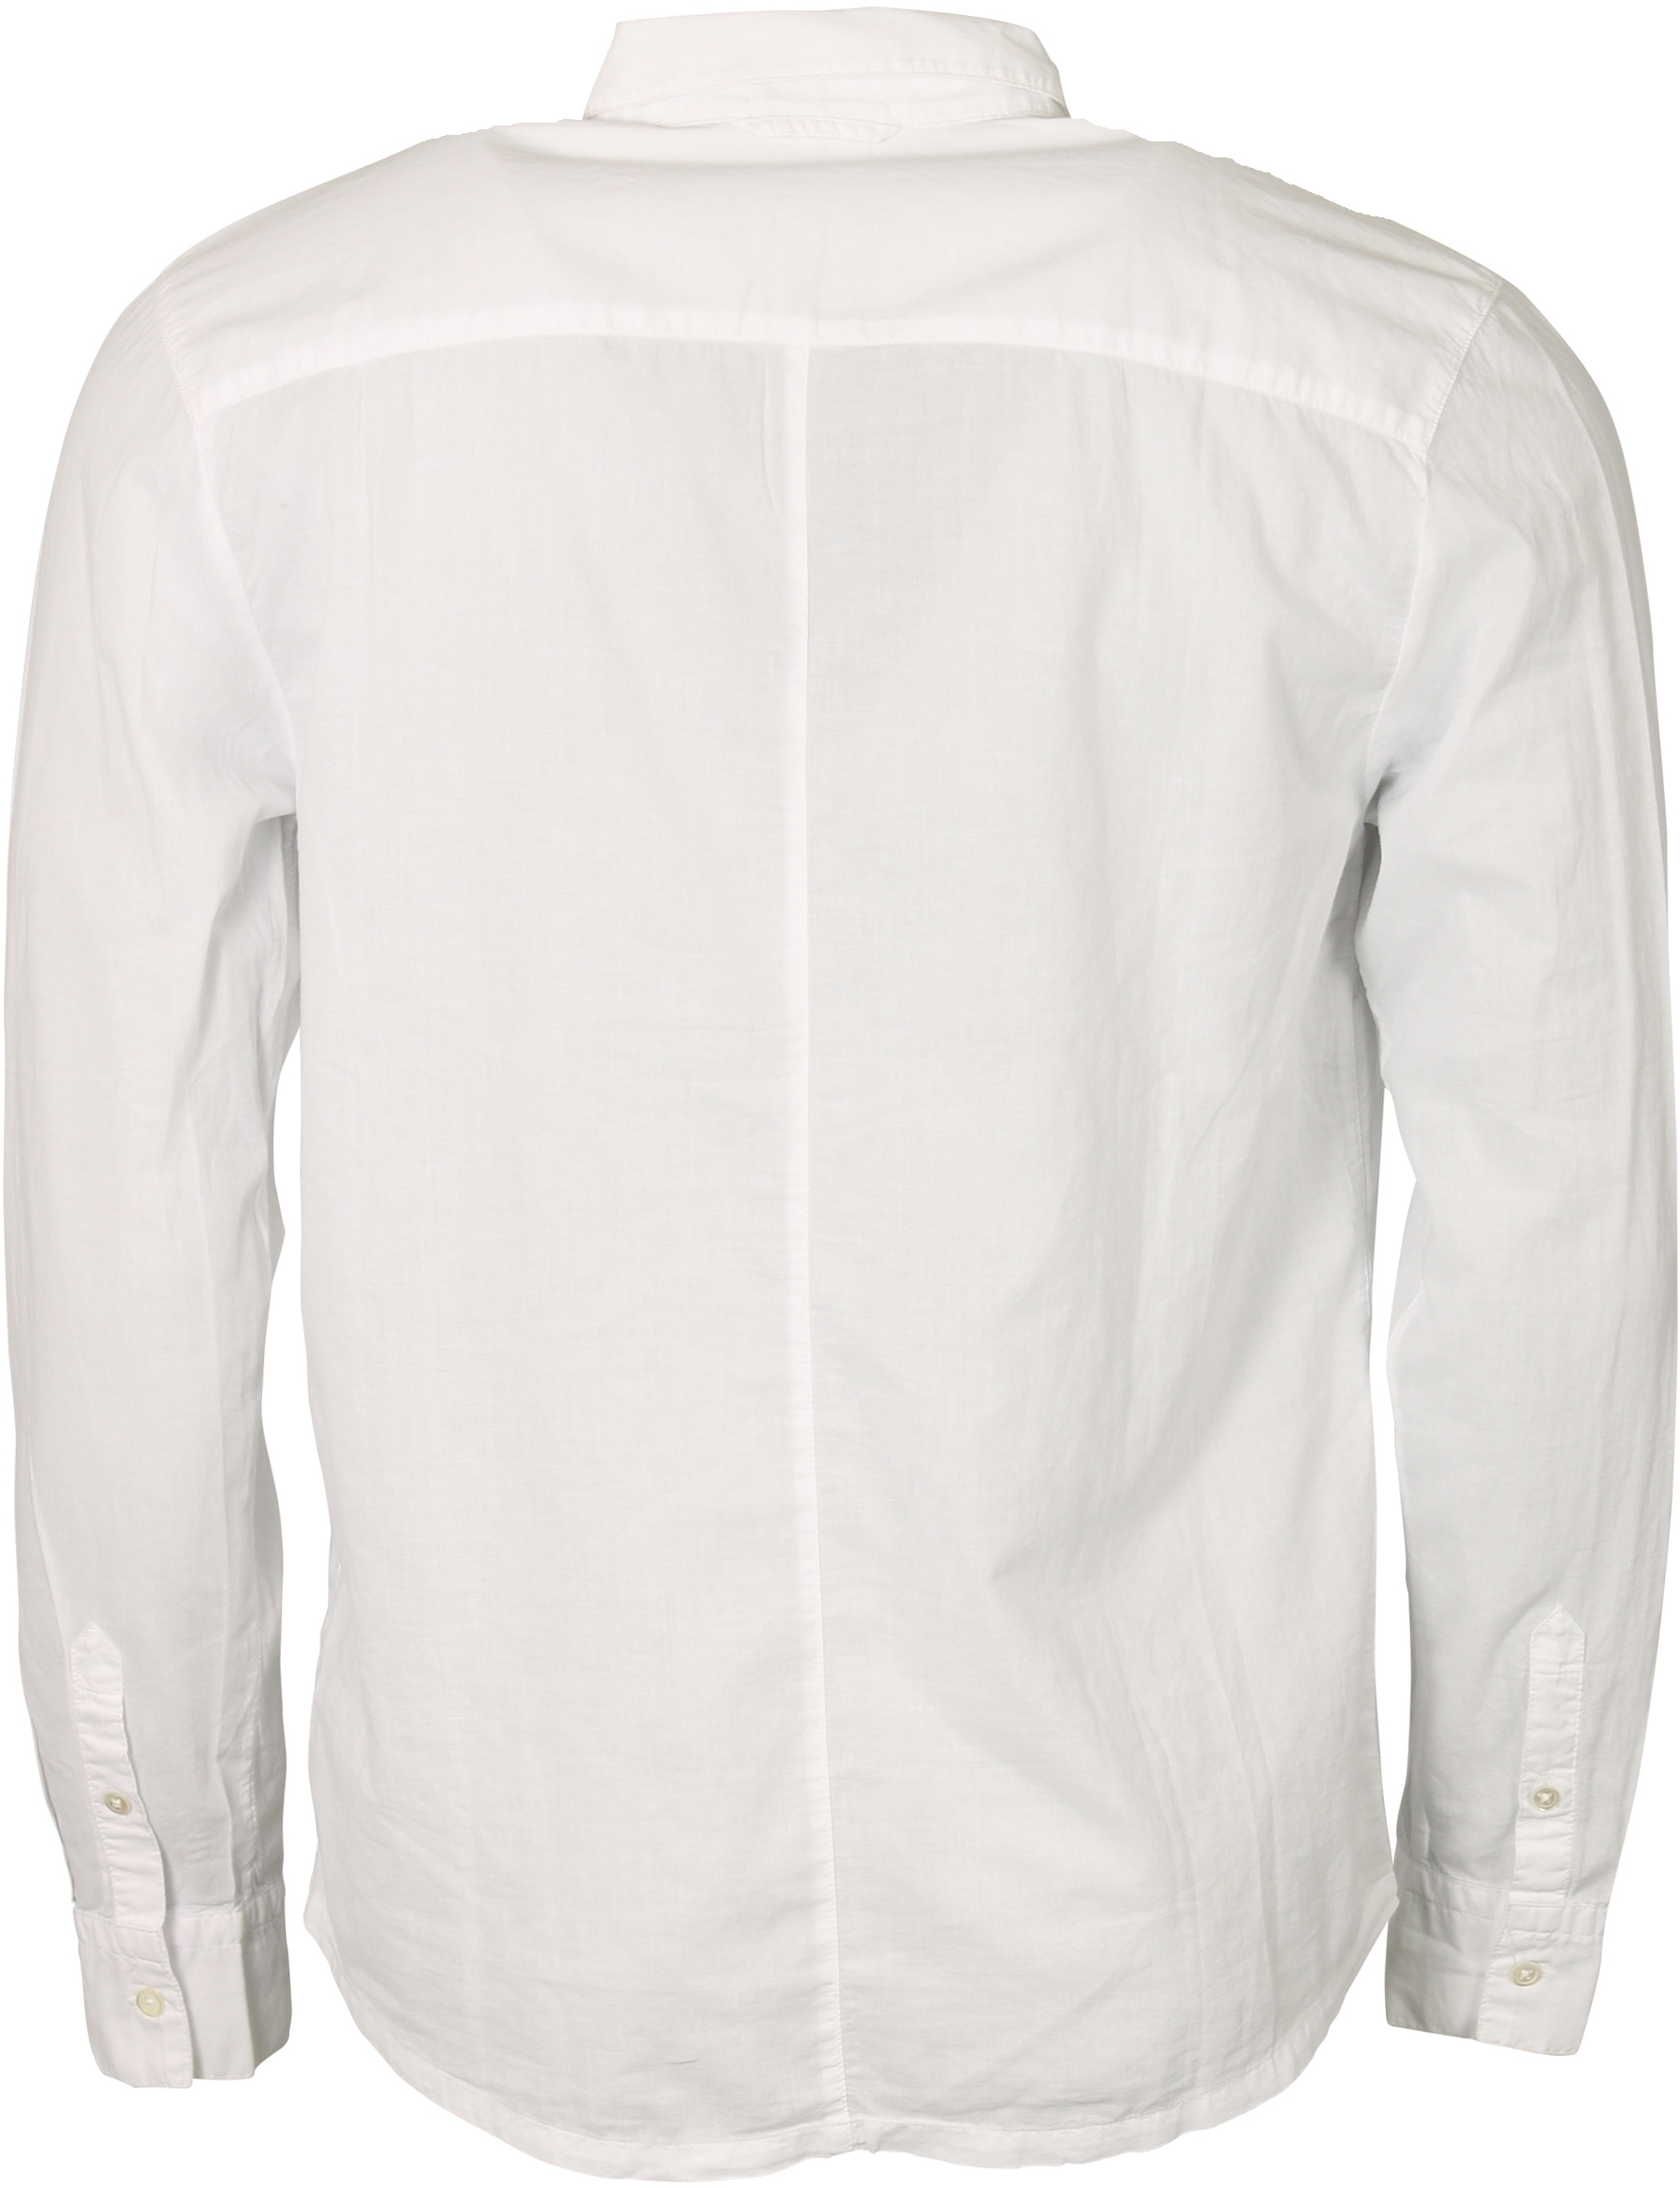 James Perse Shirt Standard in White